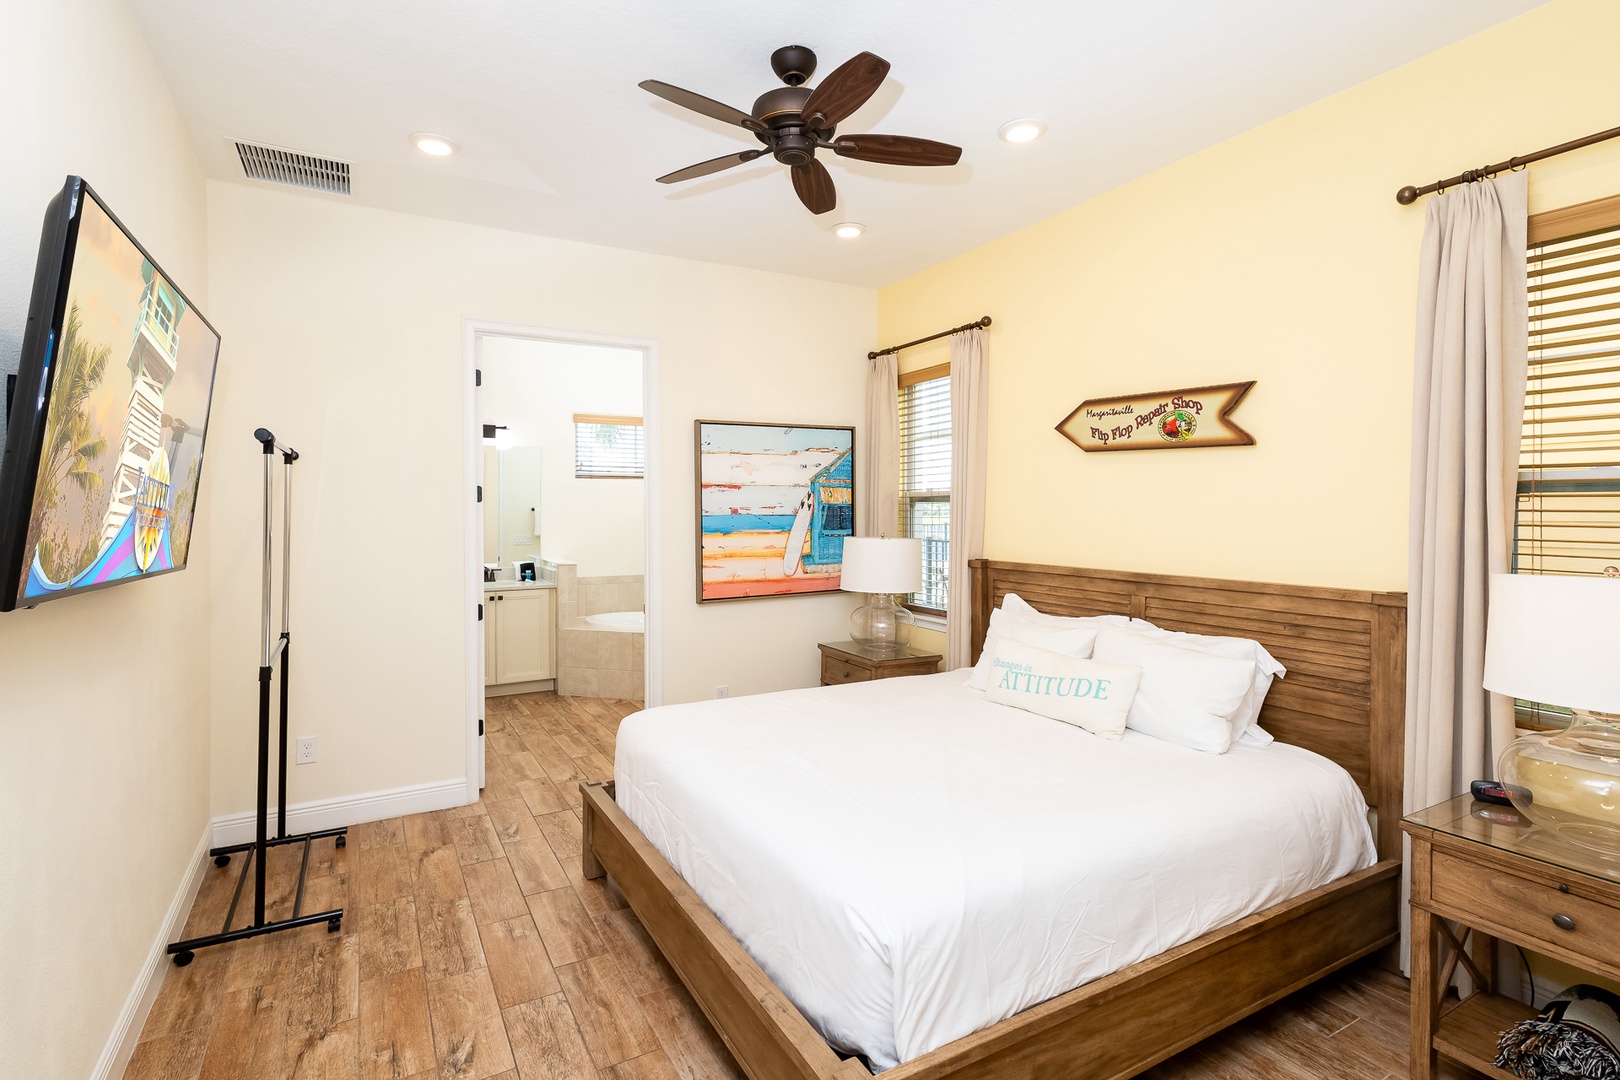 This beachy main-floor king suite boasts a private ensuite, Smart TV, & patio access